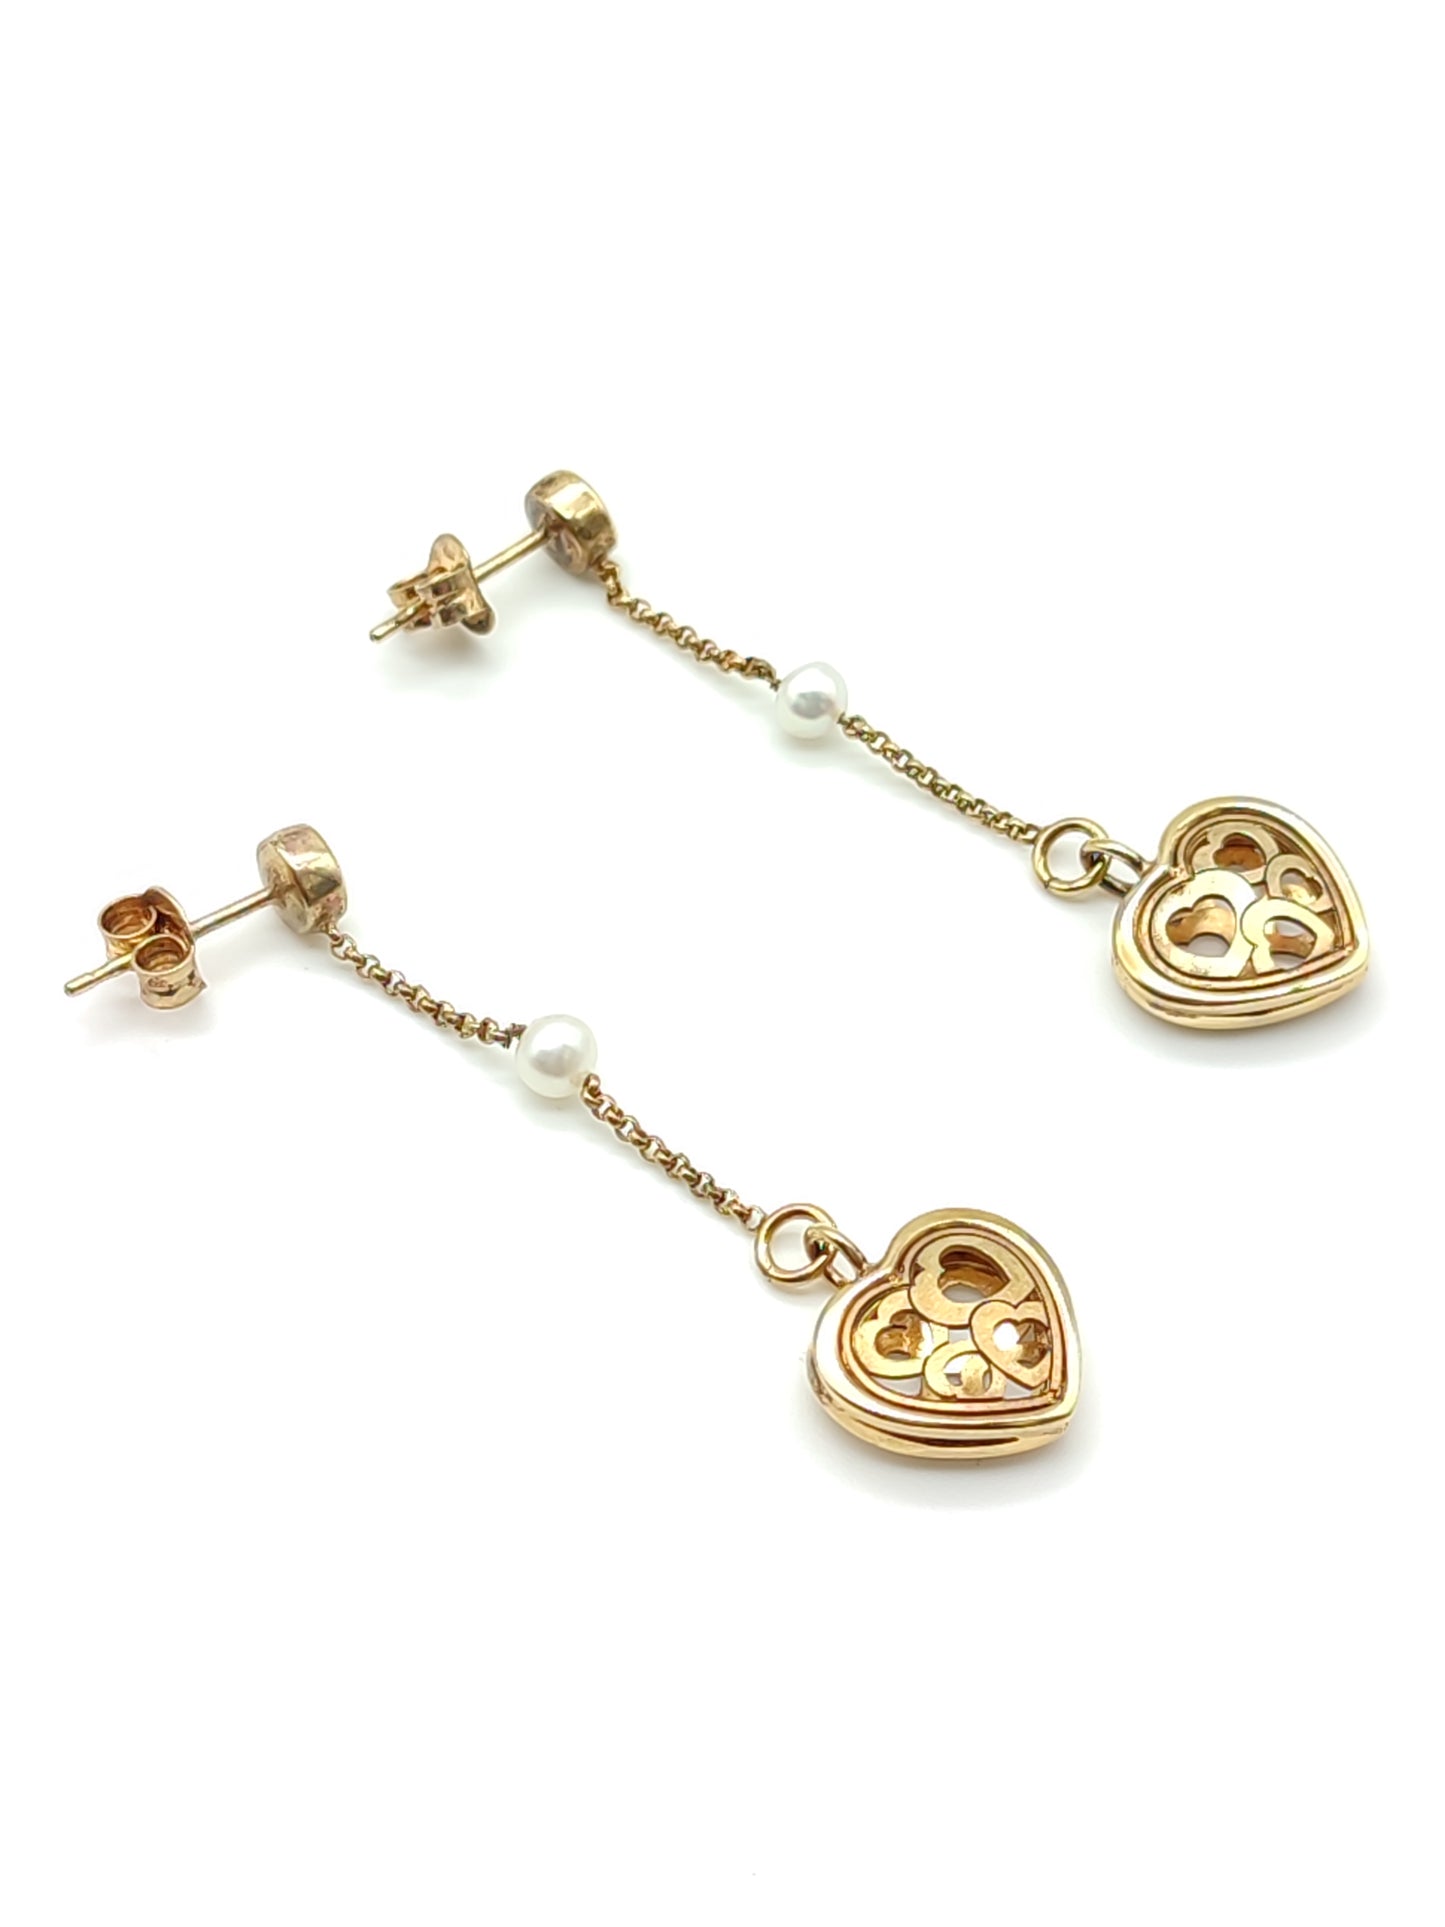 Golden silver earrings with hearts and pearls